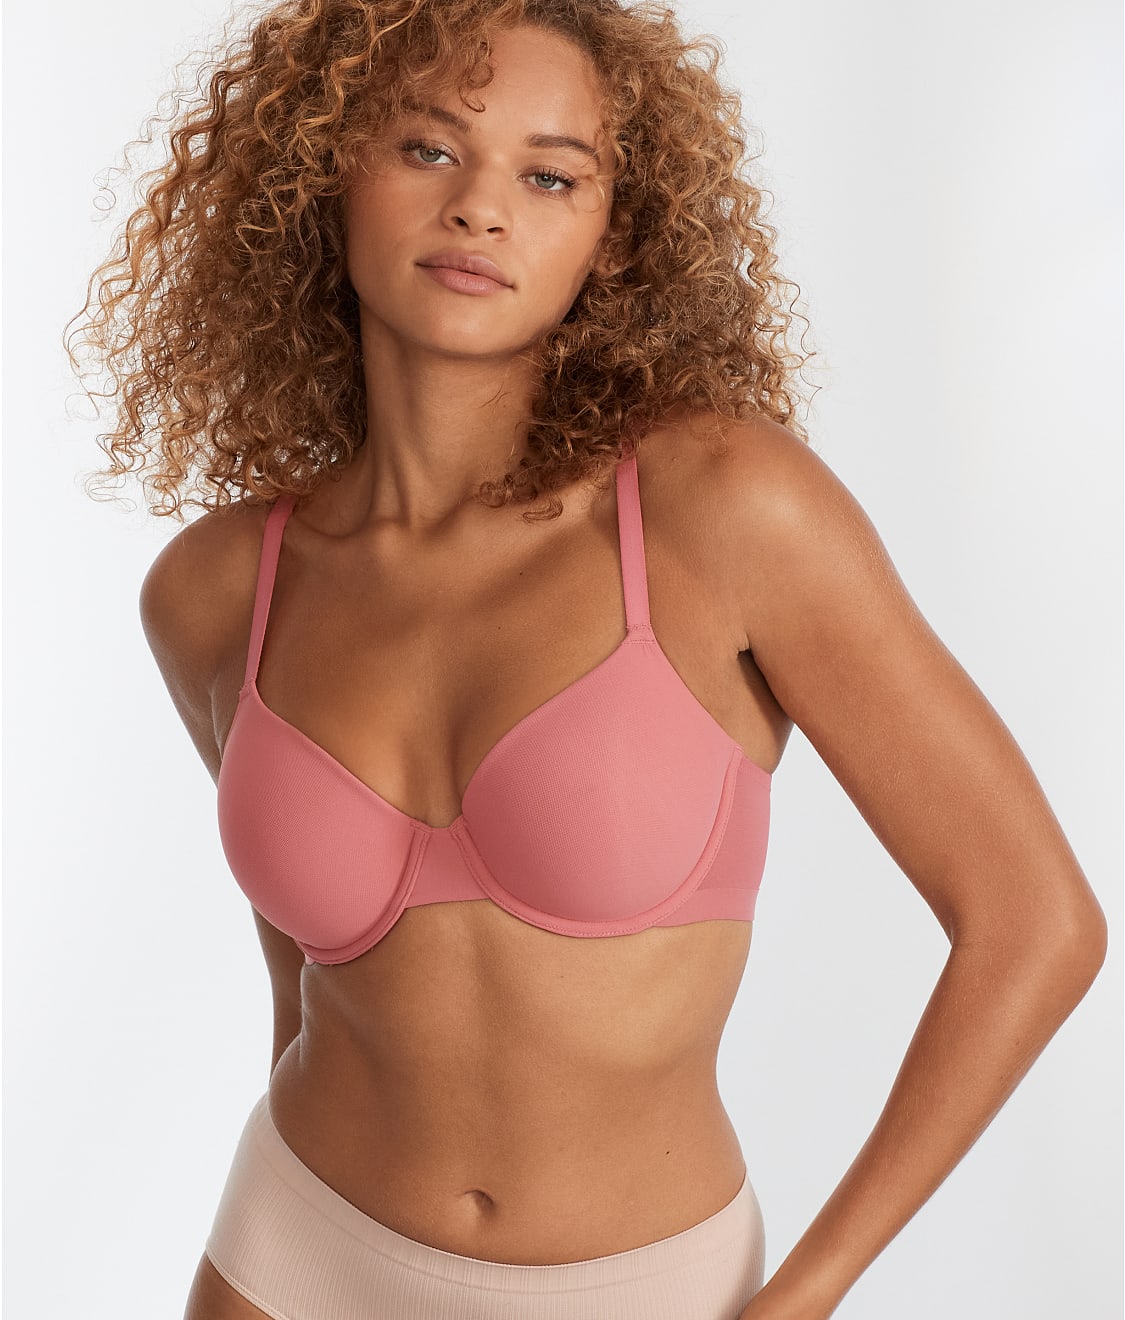 Small breasts are gathered up, the top is rounded and plump, and the  breasts are displayed. The bra without rims is three-dimensional and  cup-shaped. It is thin at the top and thick